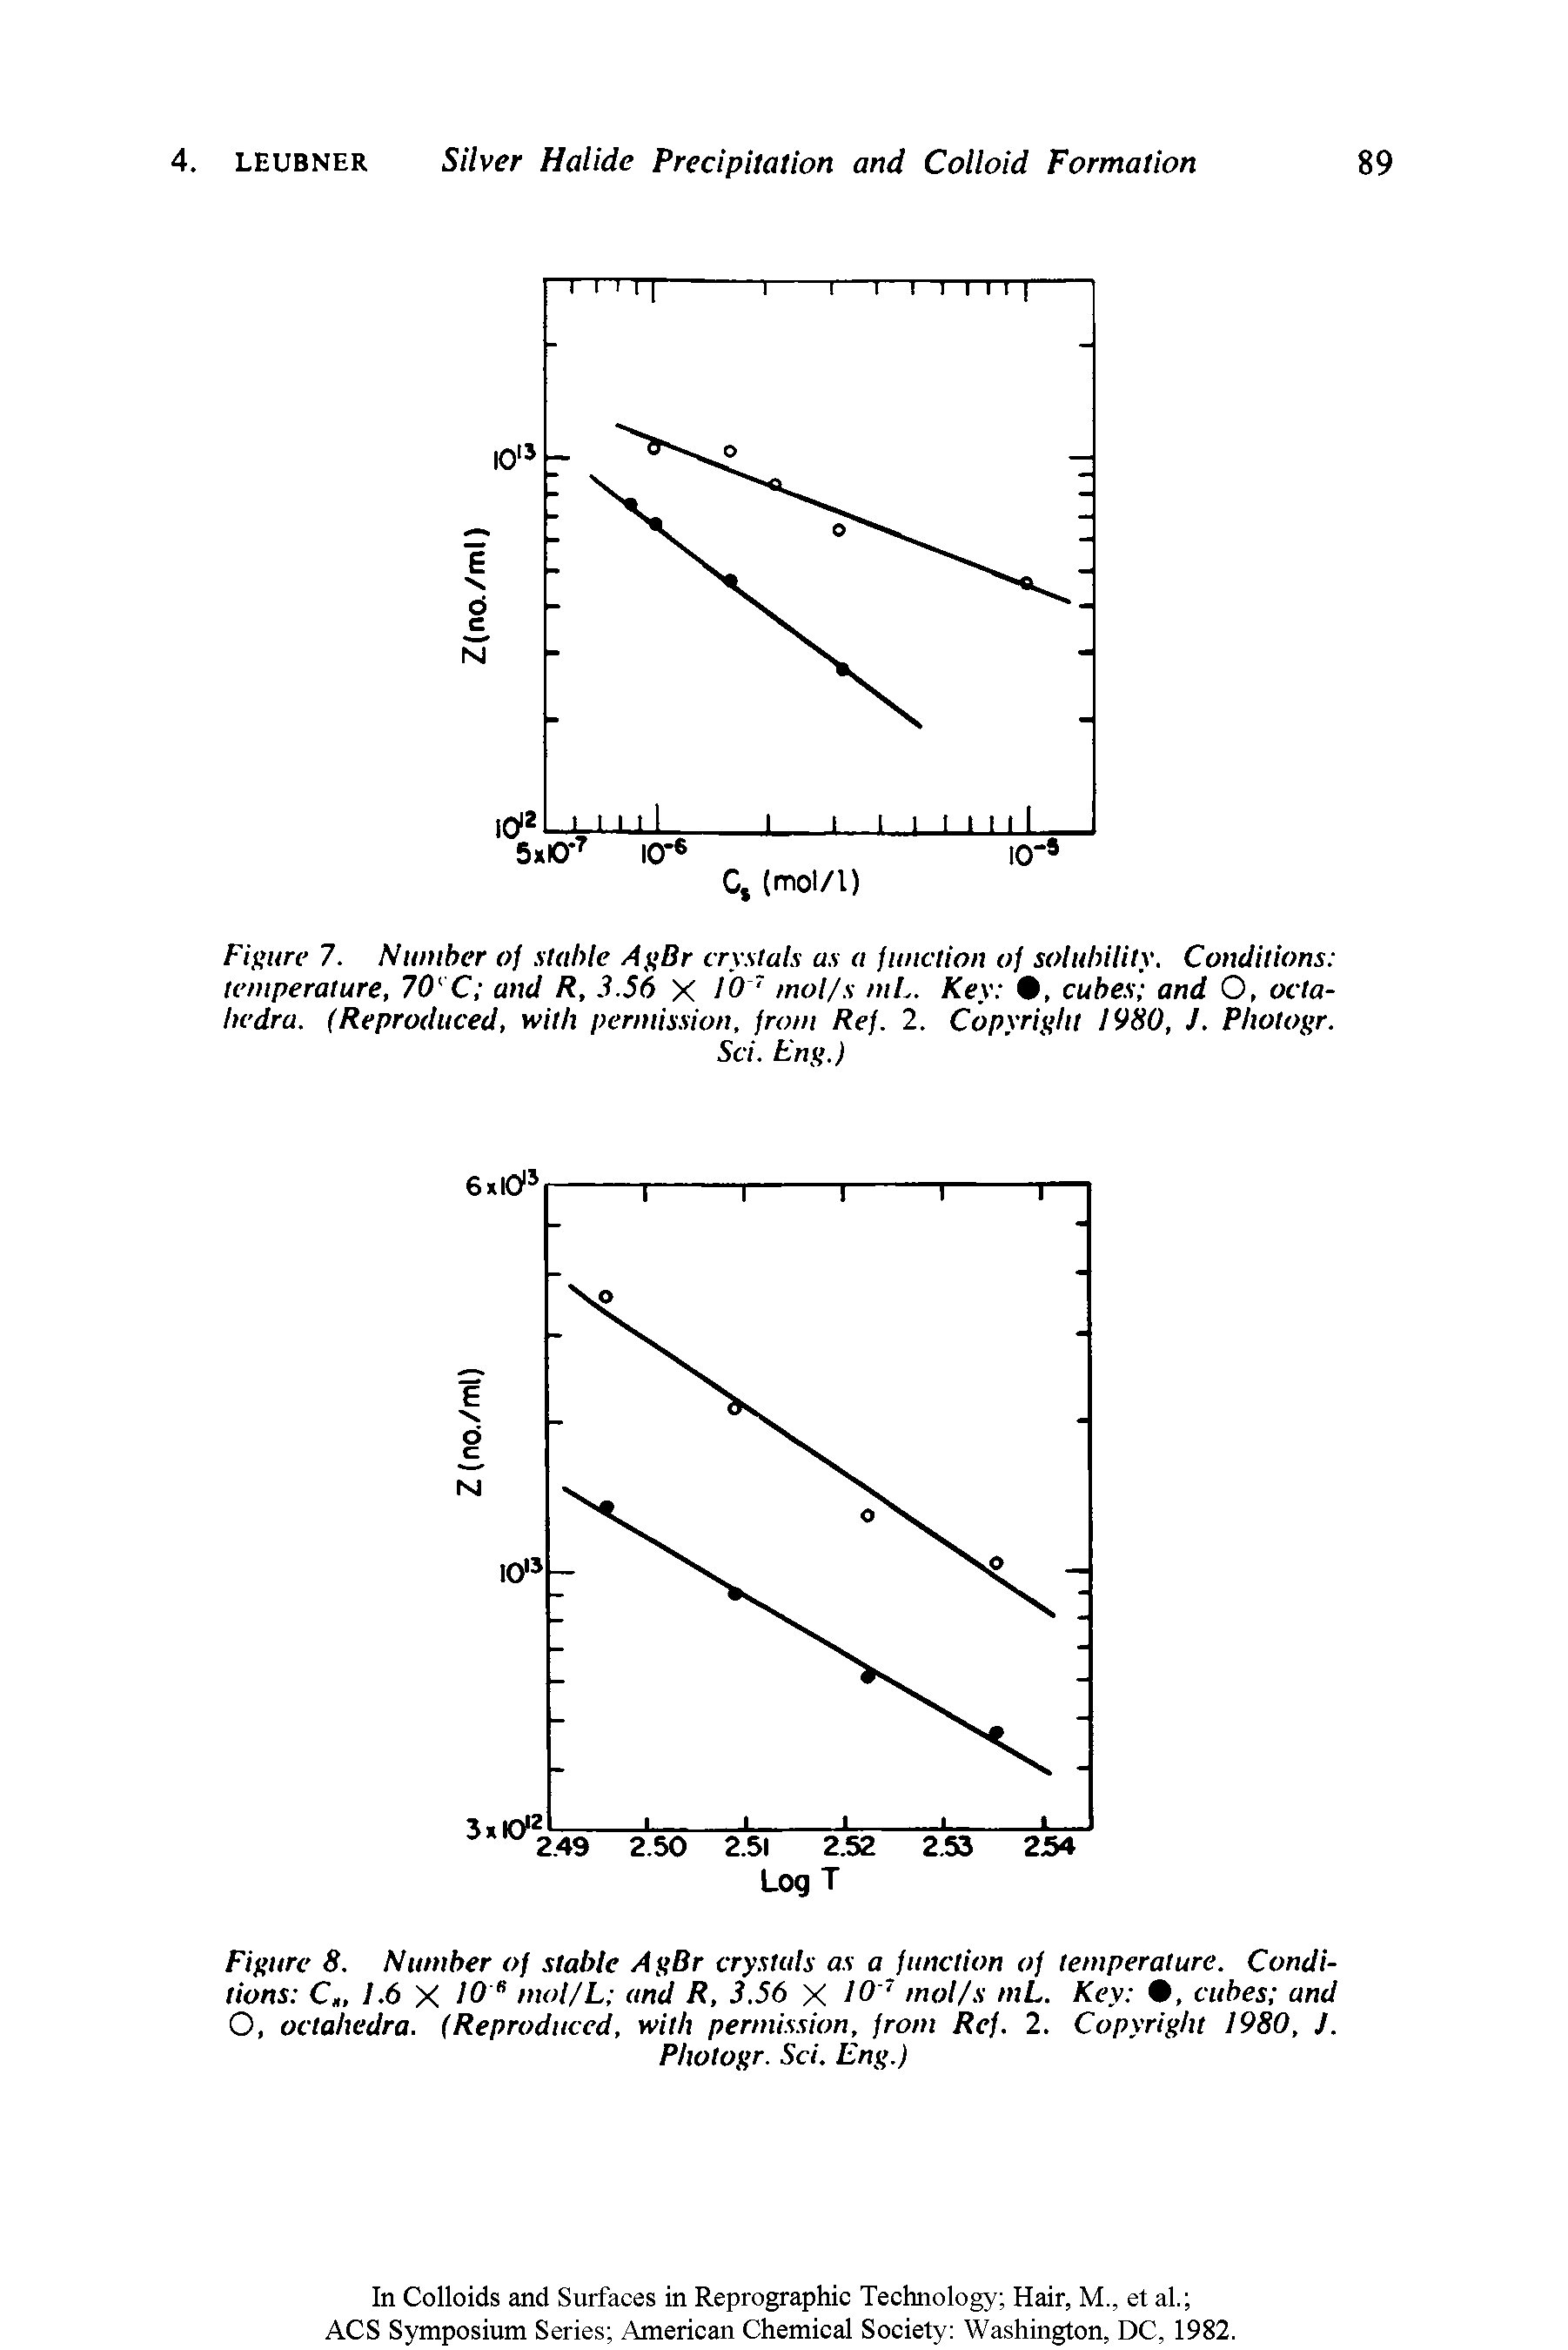 Figure 7. Number of stable AgBr crystals as a function of solubility. Conditions temperature, 70 C and R, 3.56 X 10 7 mol/s mL. Key , cubes and O, ocla-liedra. (Reproduced, with permission, from Ref. 2. Copyright 1980, J. Pliotogr.